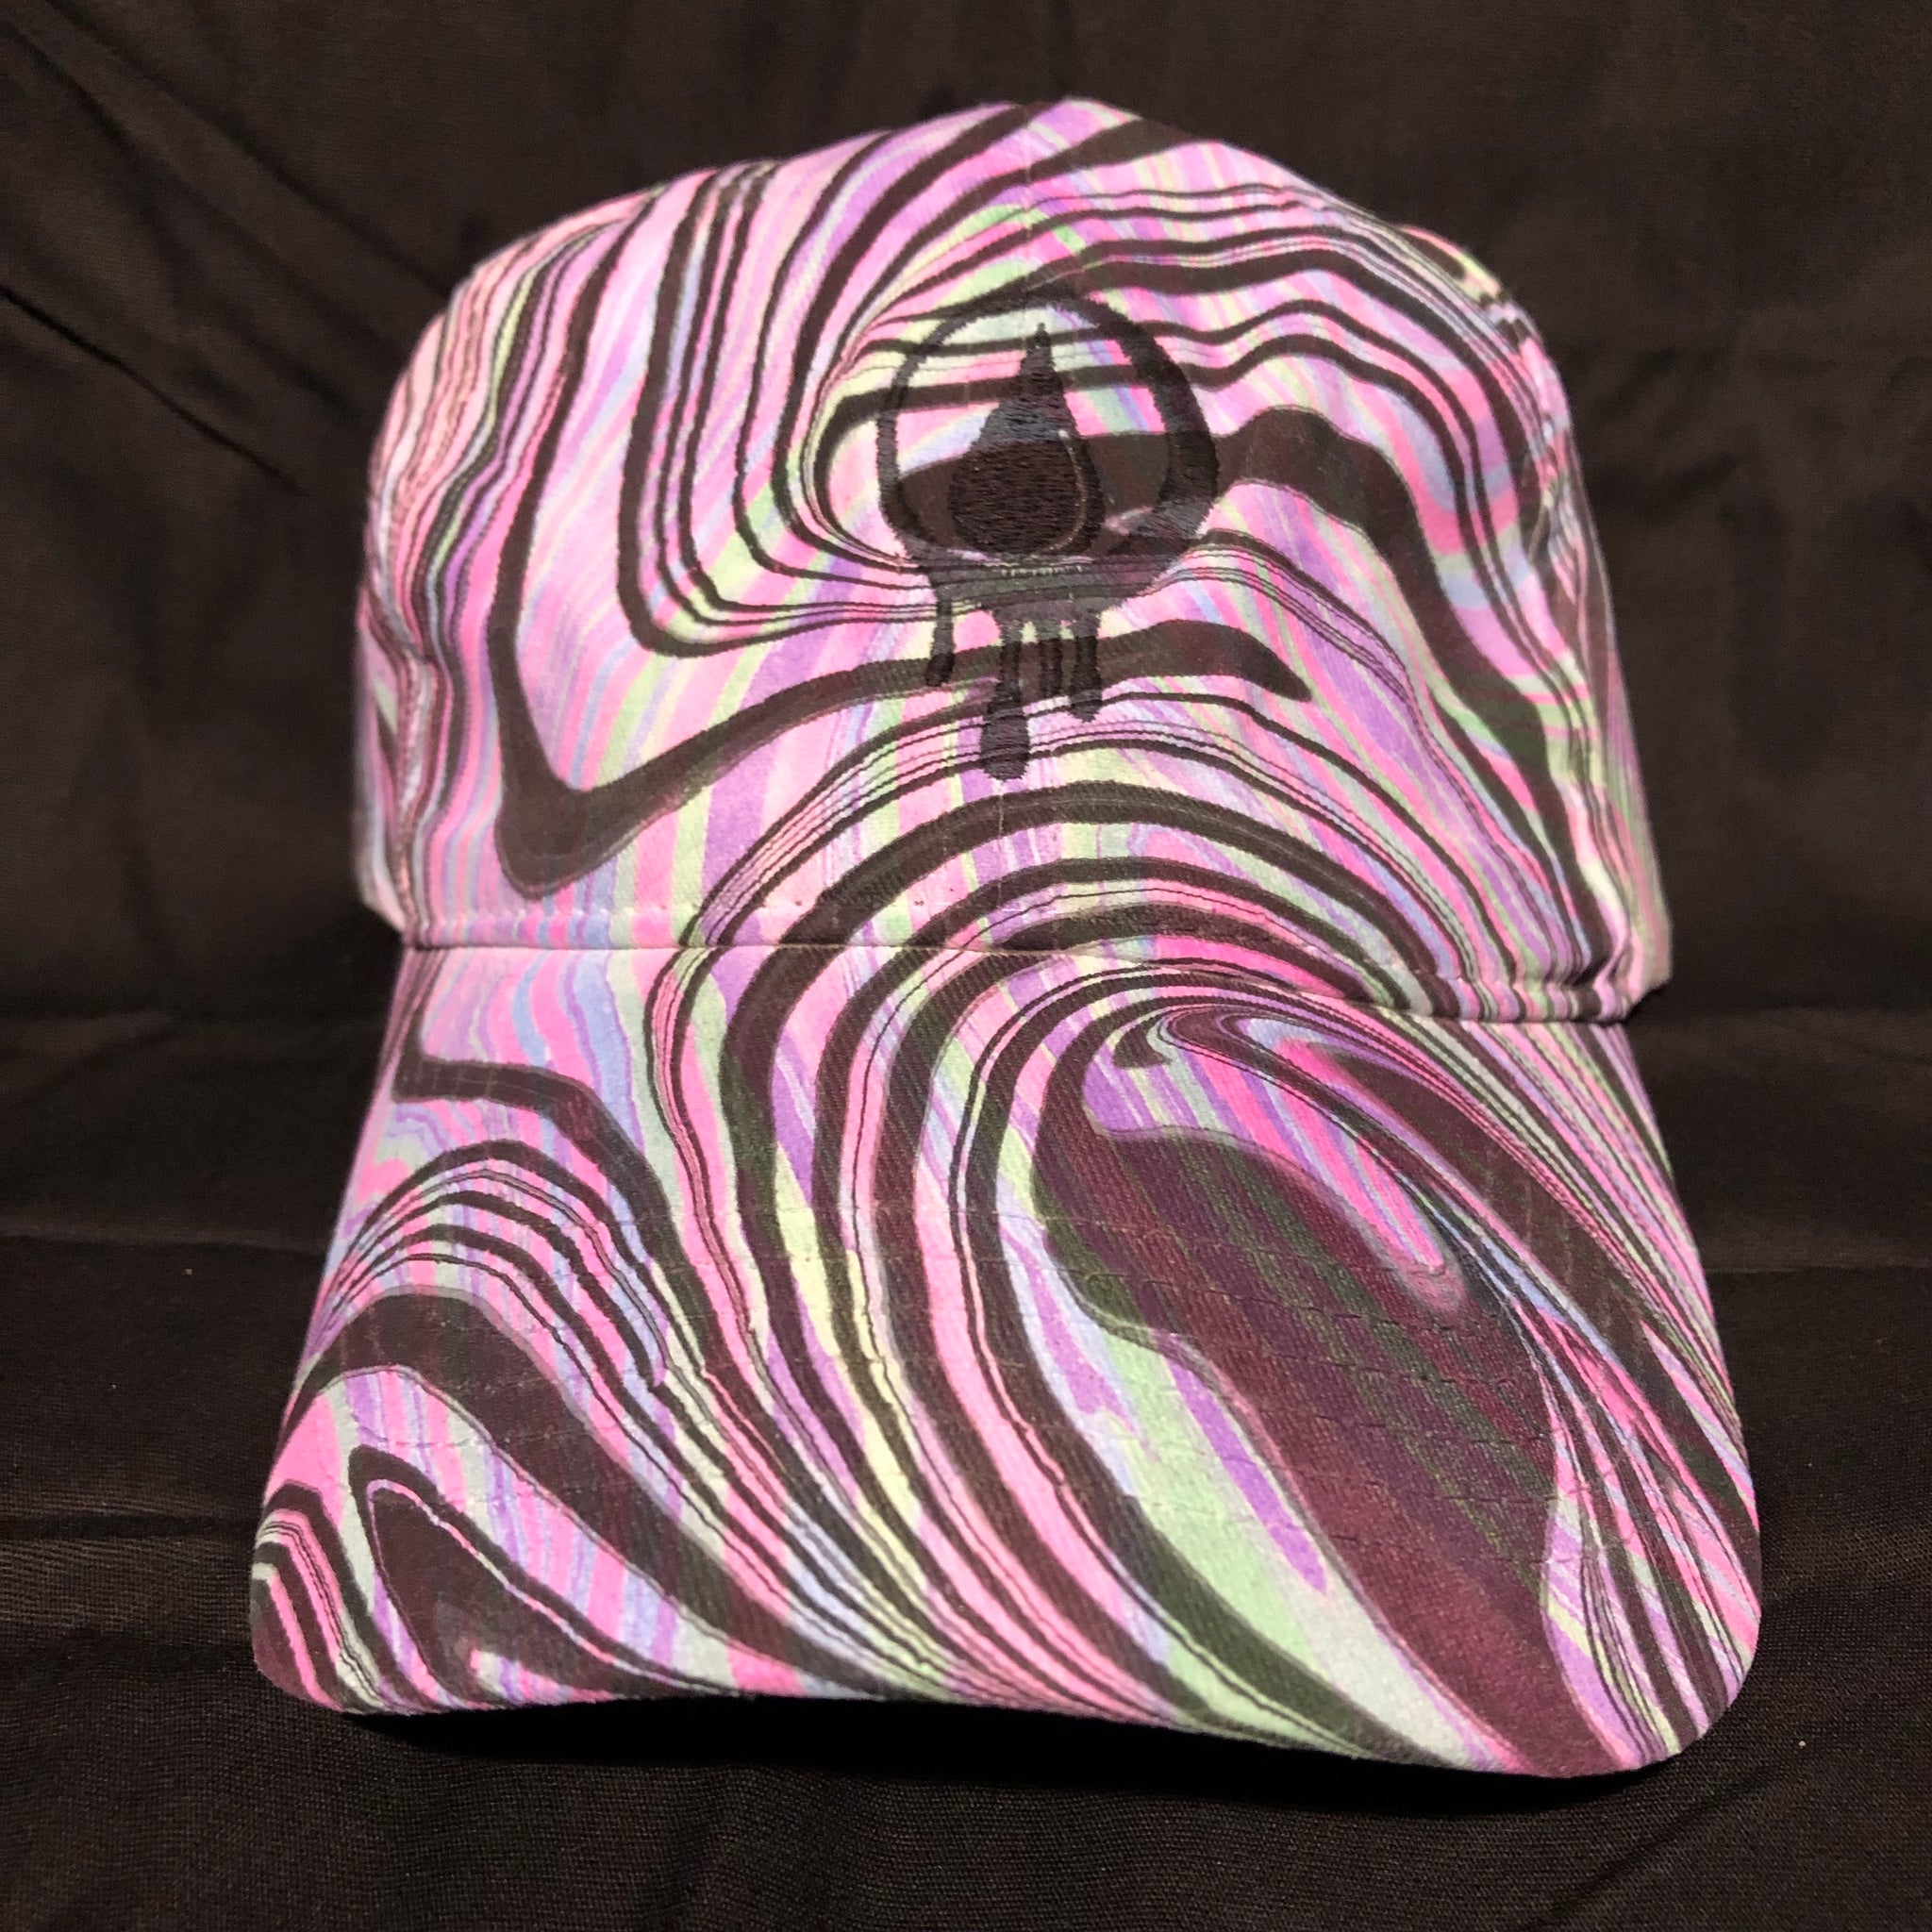 Unstructured Strap Back “DOUBLE DIP” (DAD HAT)(UV REACTIVE)